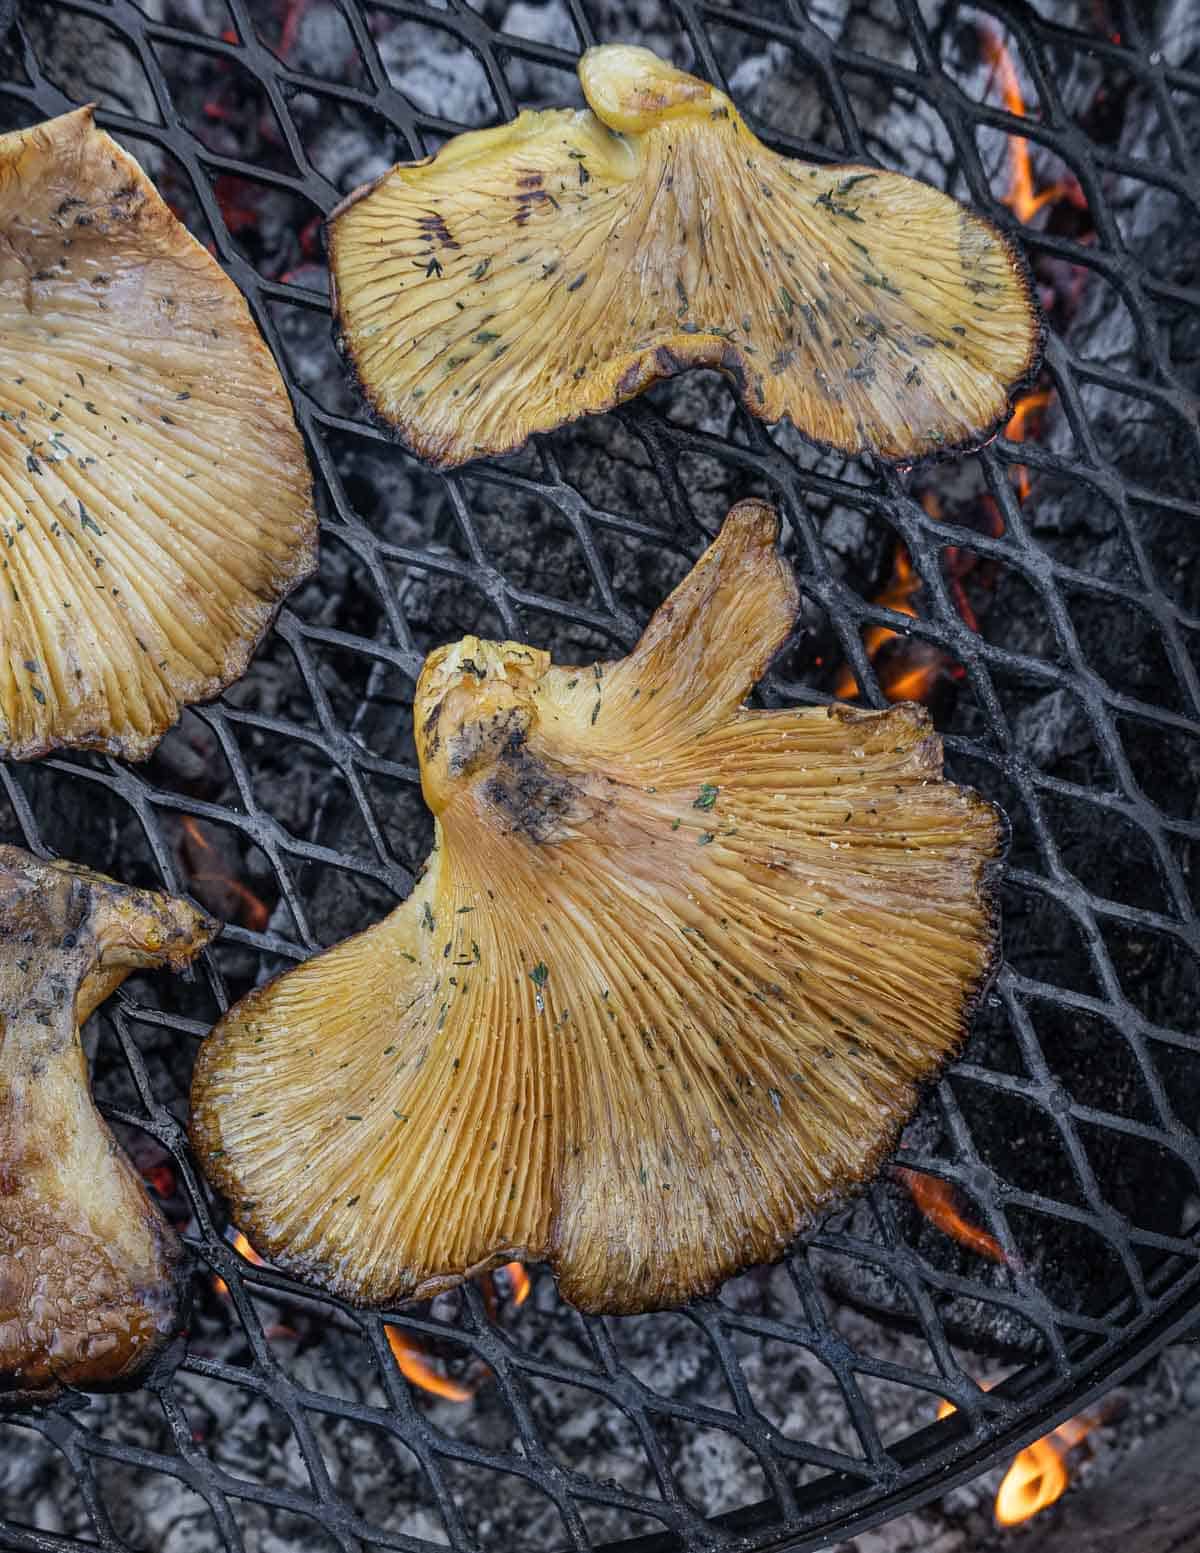 Mukitake or fall oyster mushrooms cooking on a wood fire grill. 